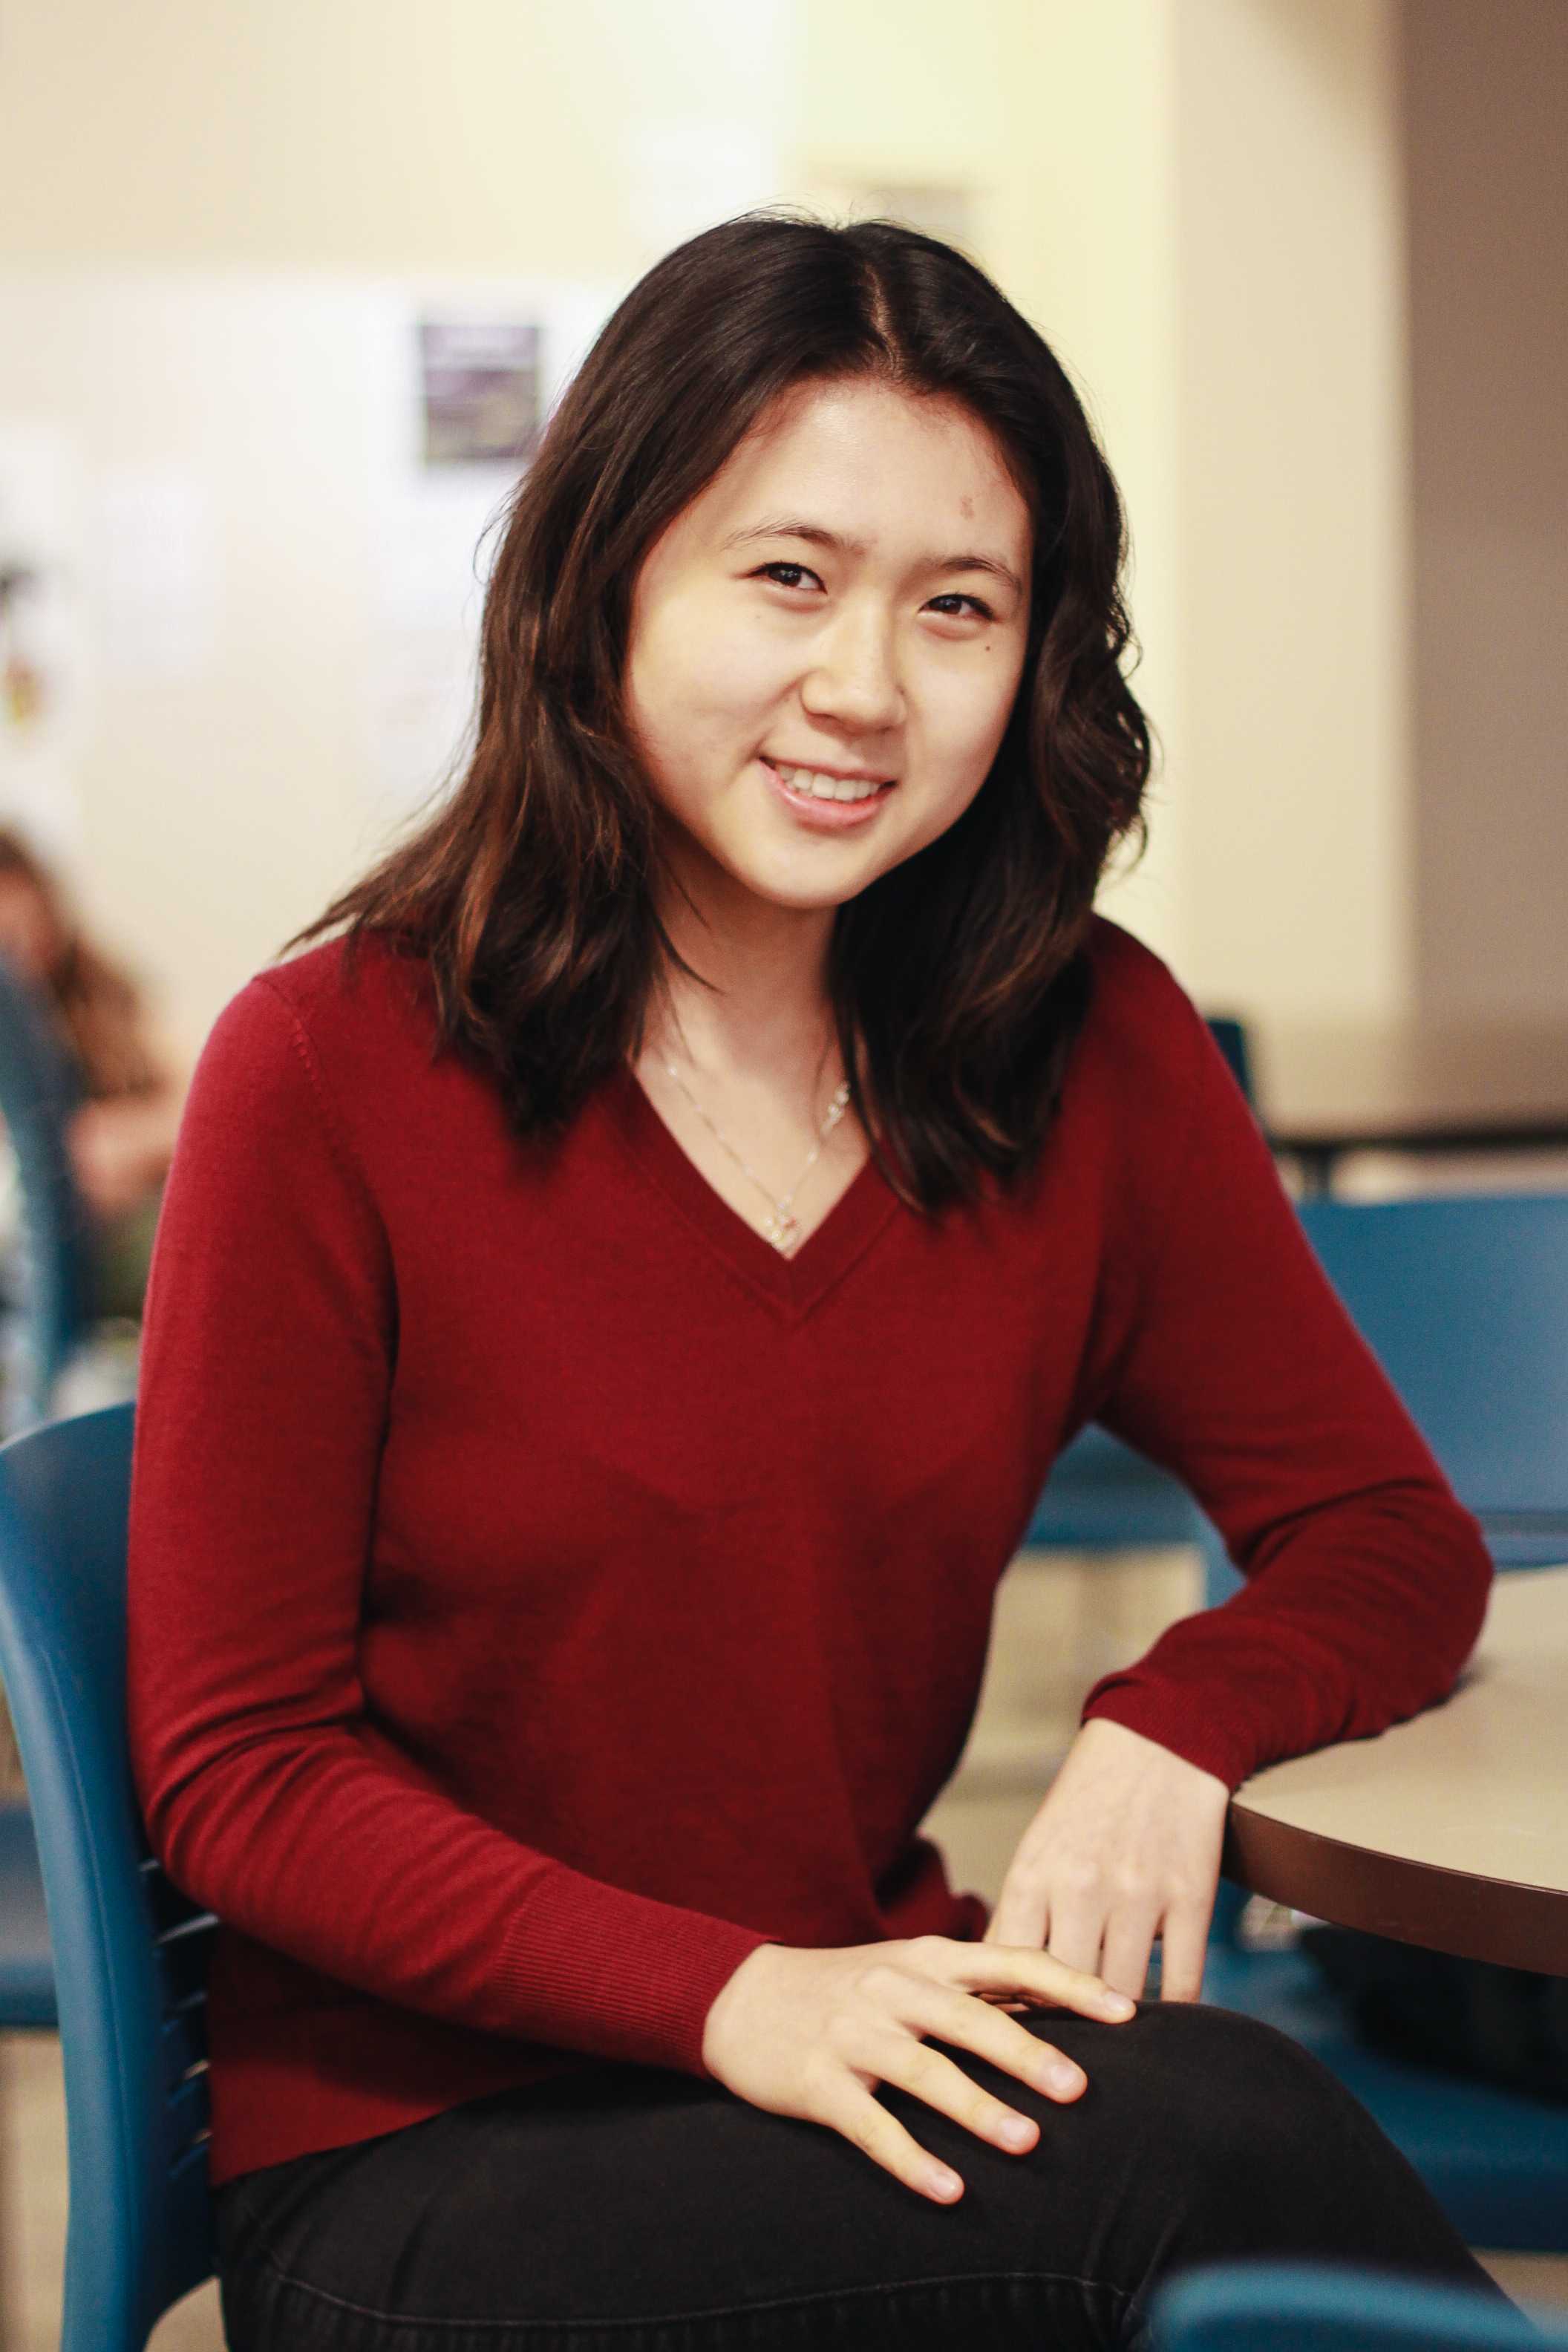 While she enjoys competing, debate is about more than winning for Zhuang. "It definitely changed who I am as a person for me," Zhuang said. "That’s [the competitive aspect of debate] very easy to get caught up in, especially when you’re first starting out."